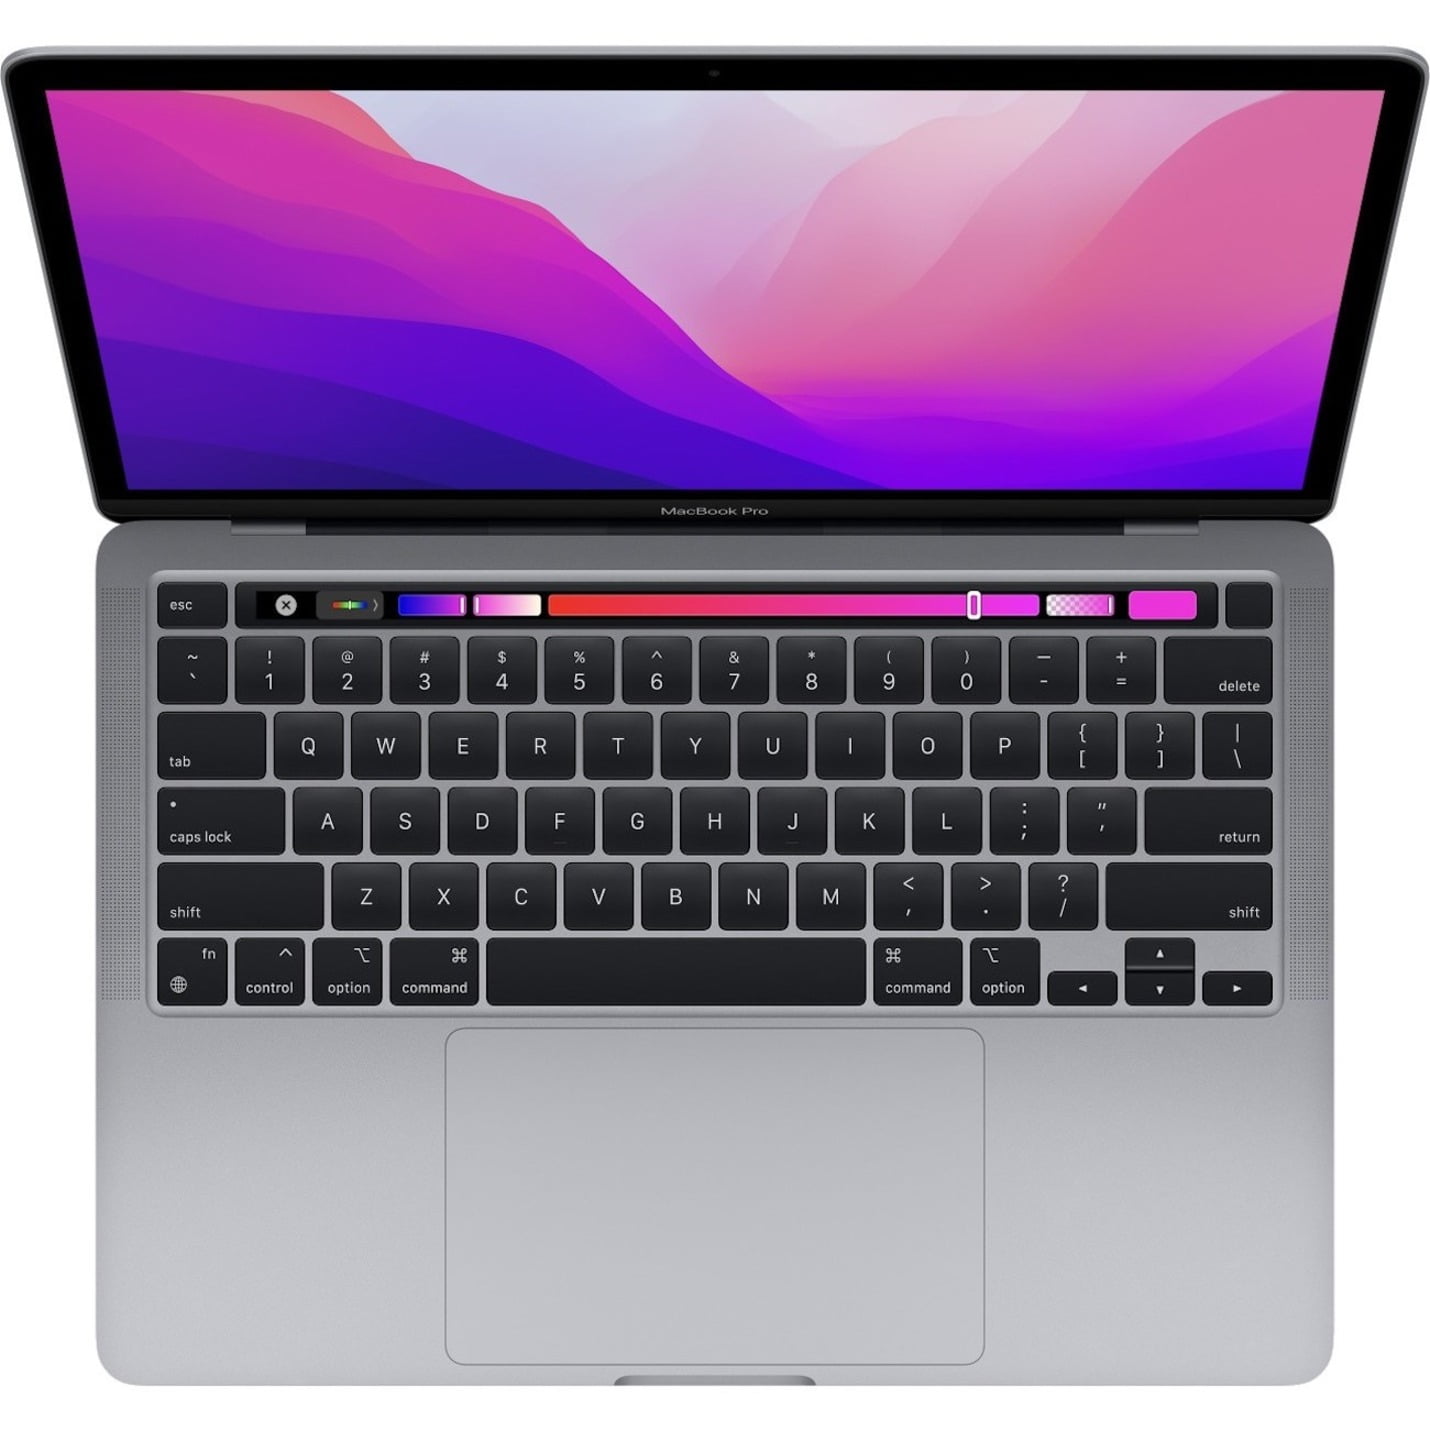 2022 Apple MacBook Pro Laptop with chip: 13-inch Retina Display, 8GB RAM, 256GB SSD Storage, Touch Bar, Backlit Keyboard, FaceTime HD Camera. Works with iPhone and iPad; Space Gray - Walmart.com